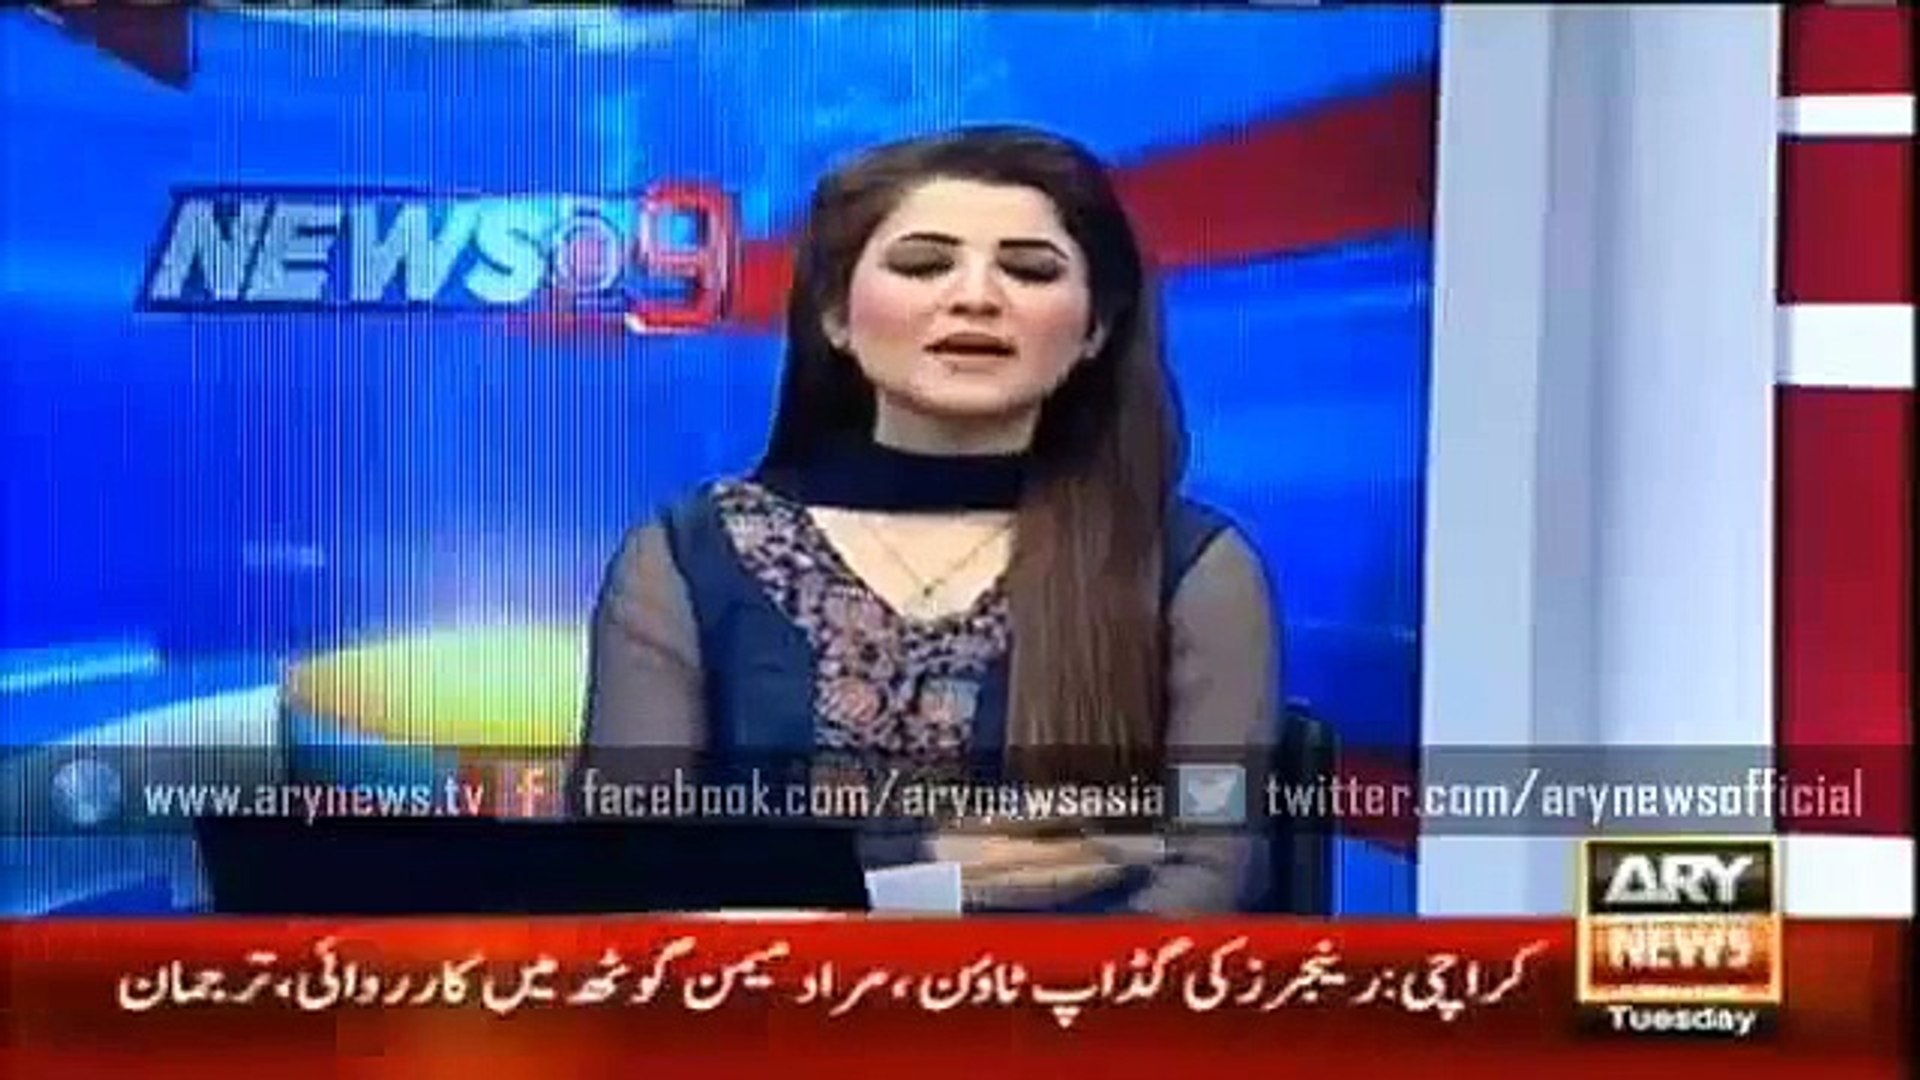 Latest News - Bombs Placed In Schools Of Paris - Ary News Headlines 27 January 2016